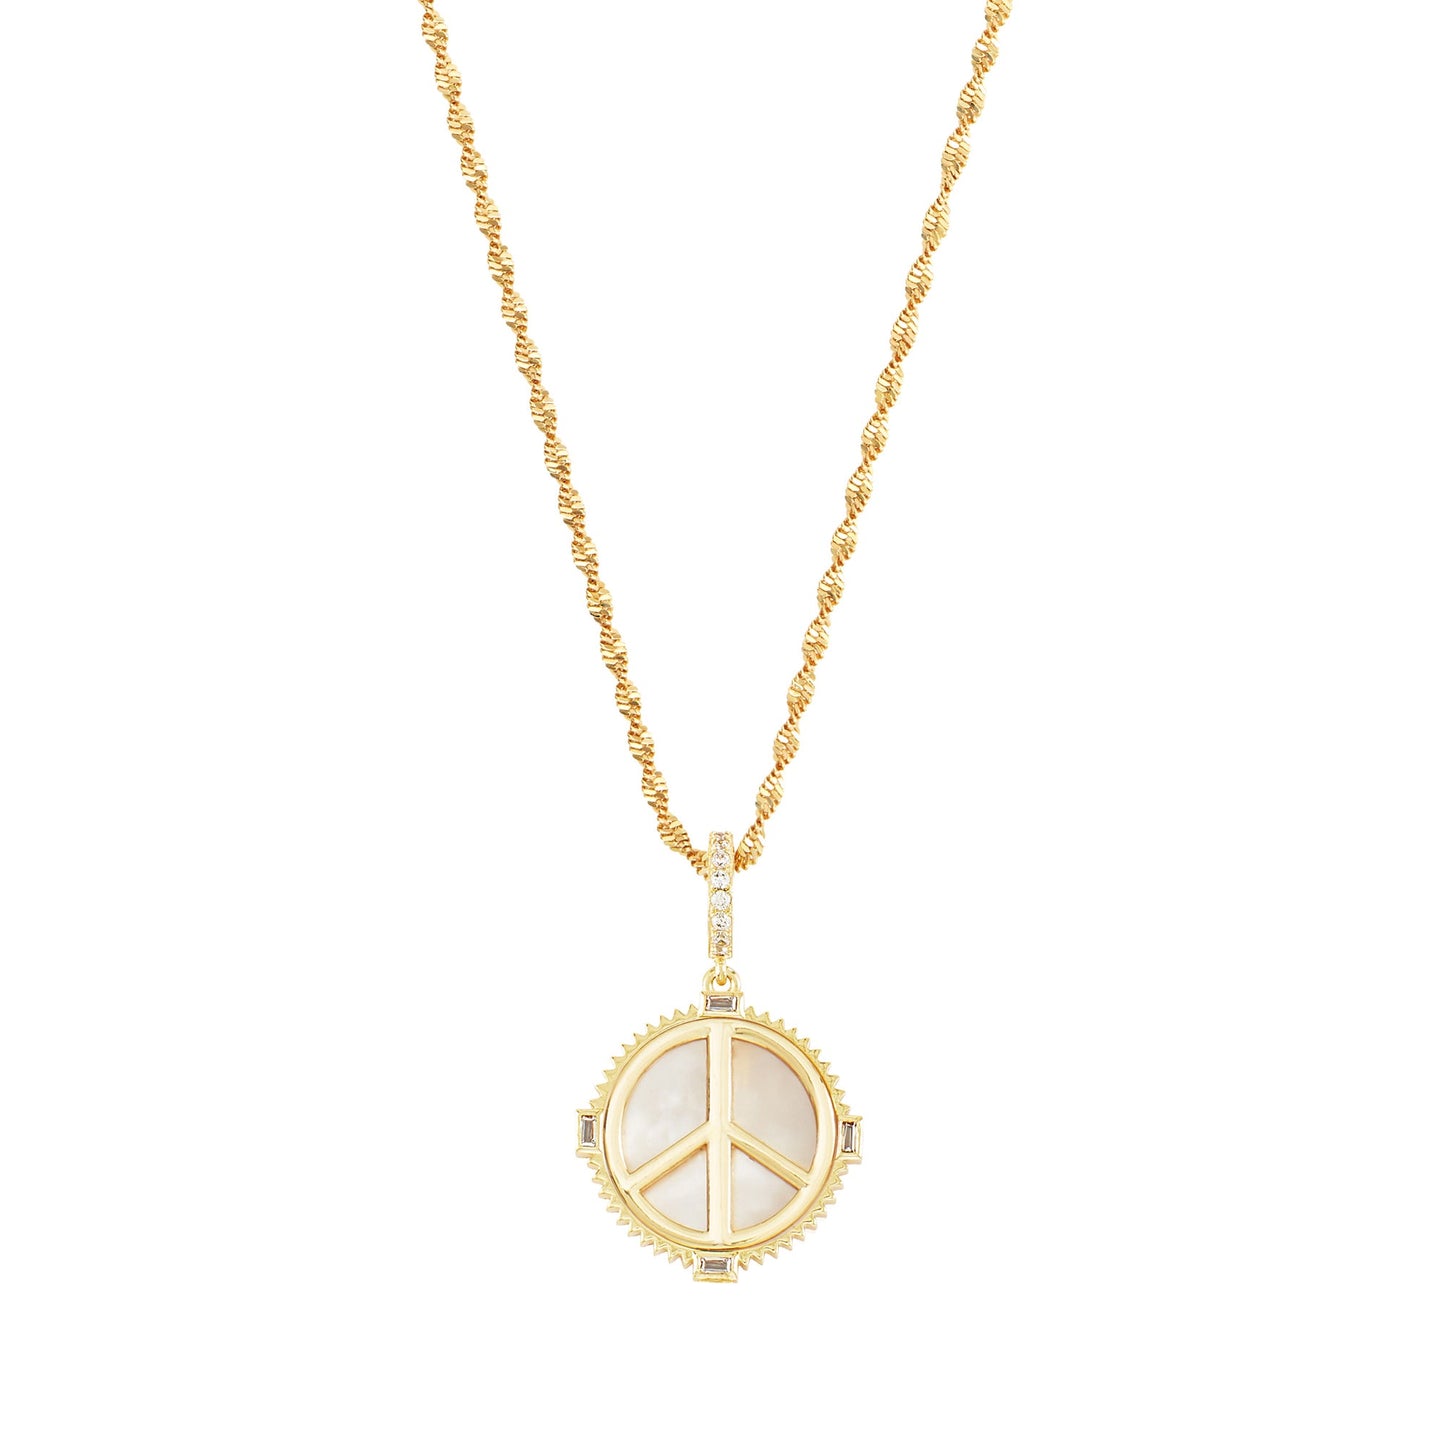 The Woodstock Necklace